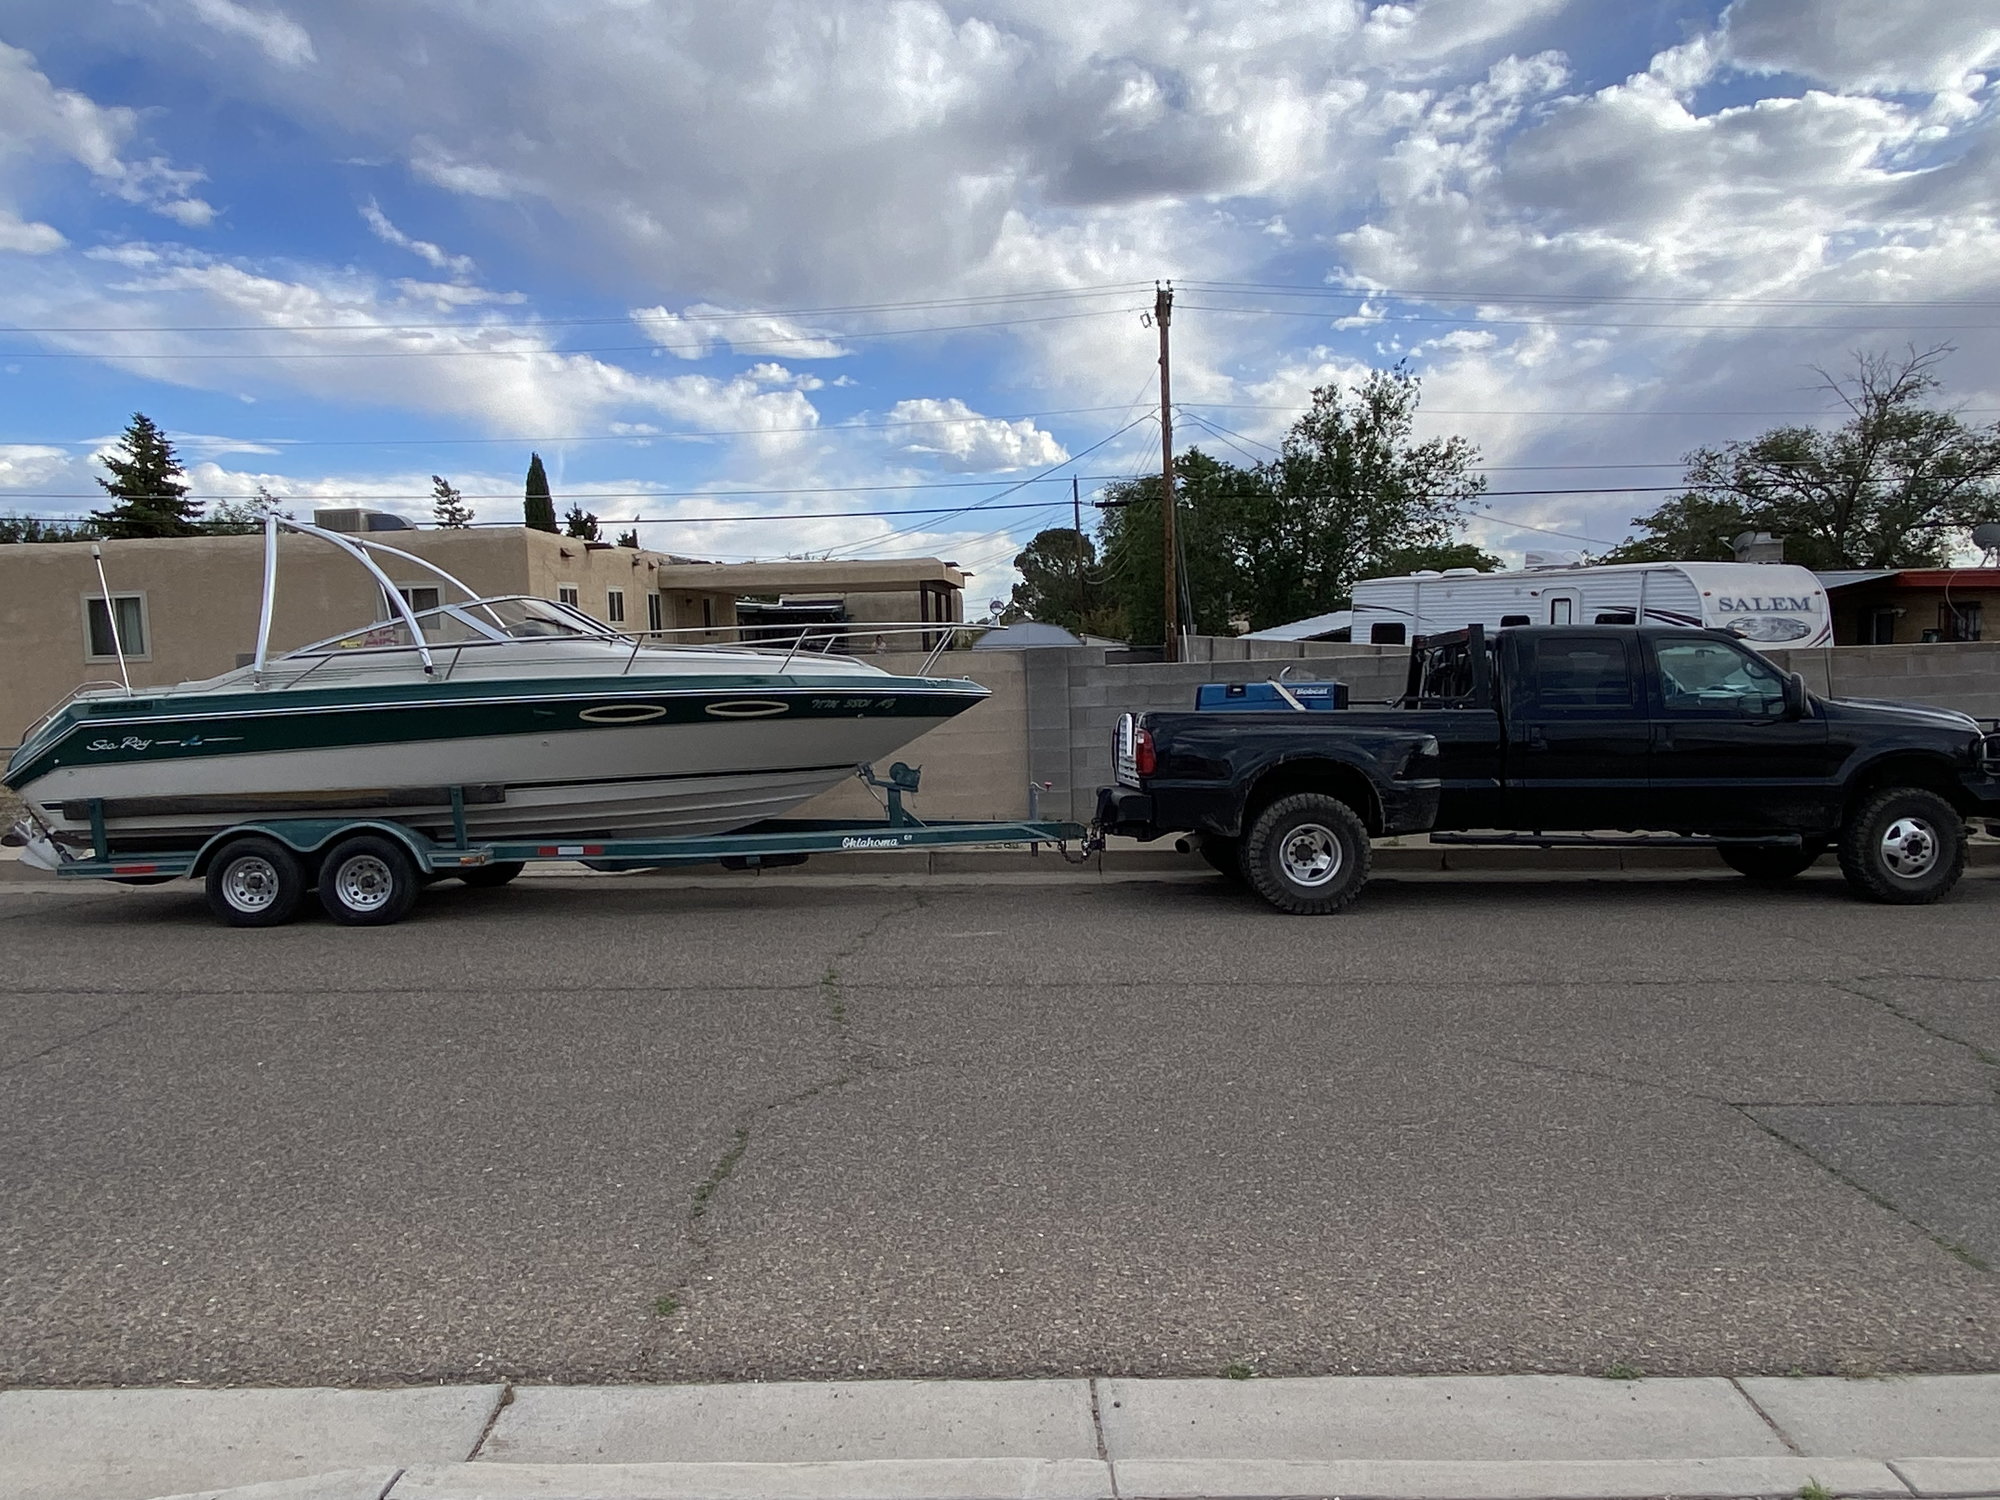 New to us boat has 2 propeller options, which should we use